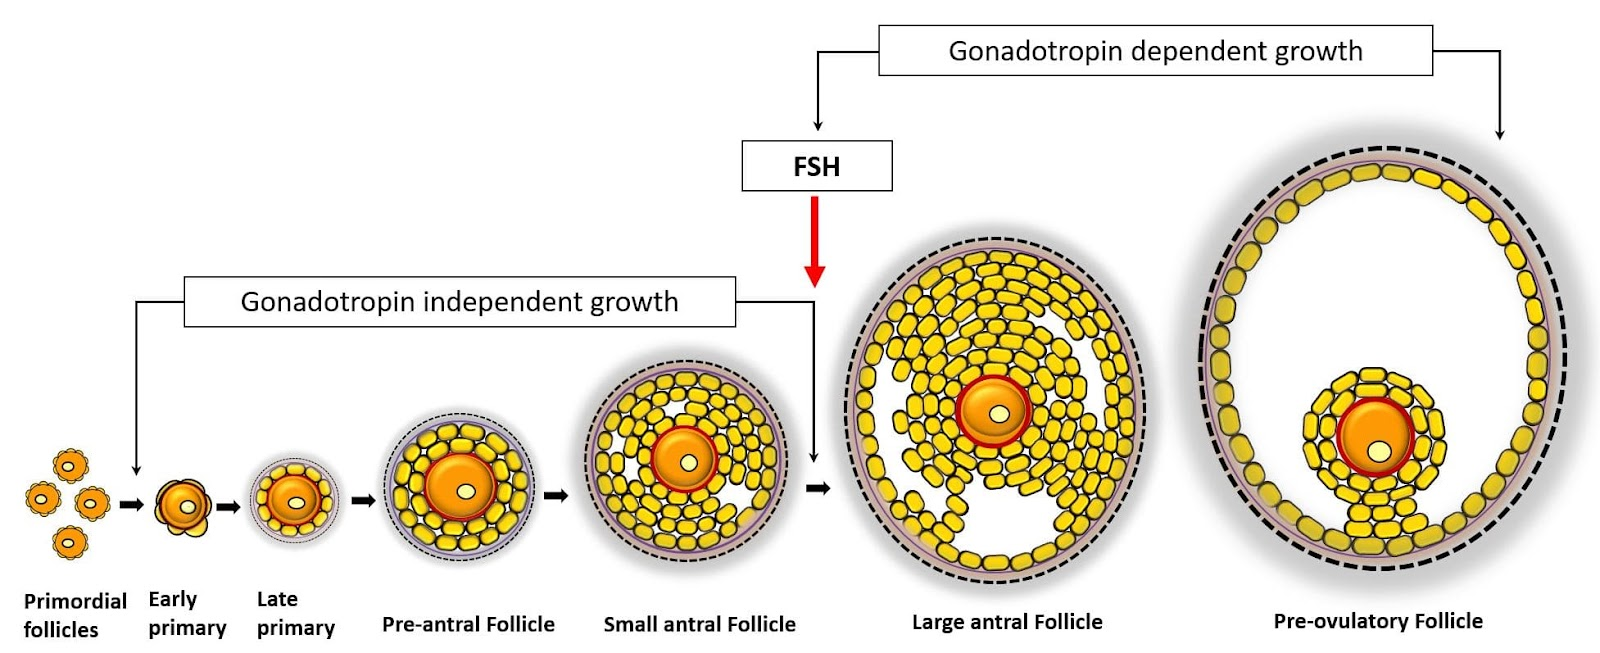 What are the stages of follicular development?